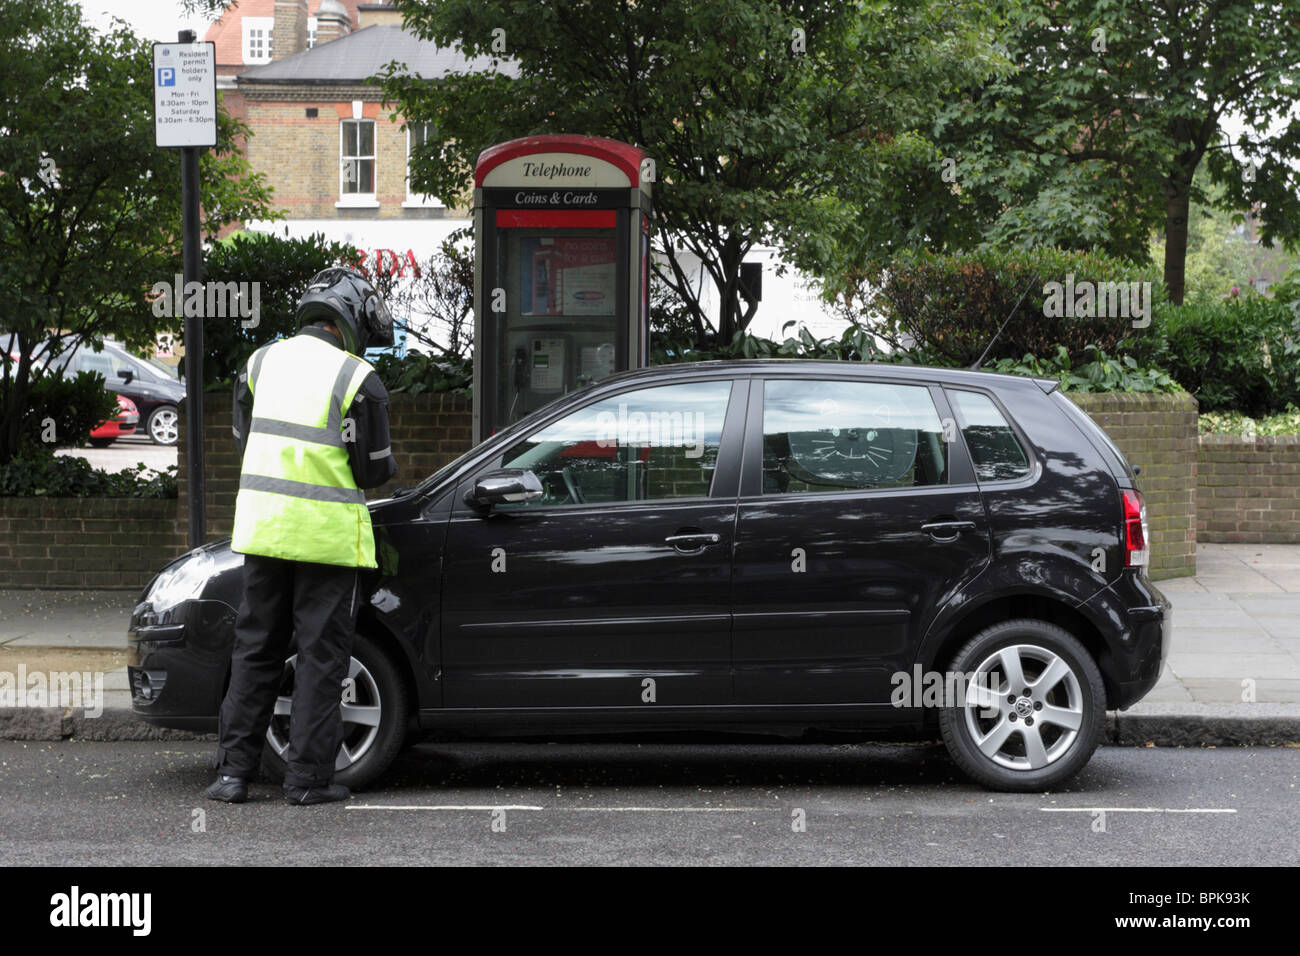 London Traffic Warden issuing a PCN upon a vehicle in Sydney Street, Chelsea, London. Stock Photo